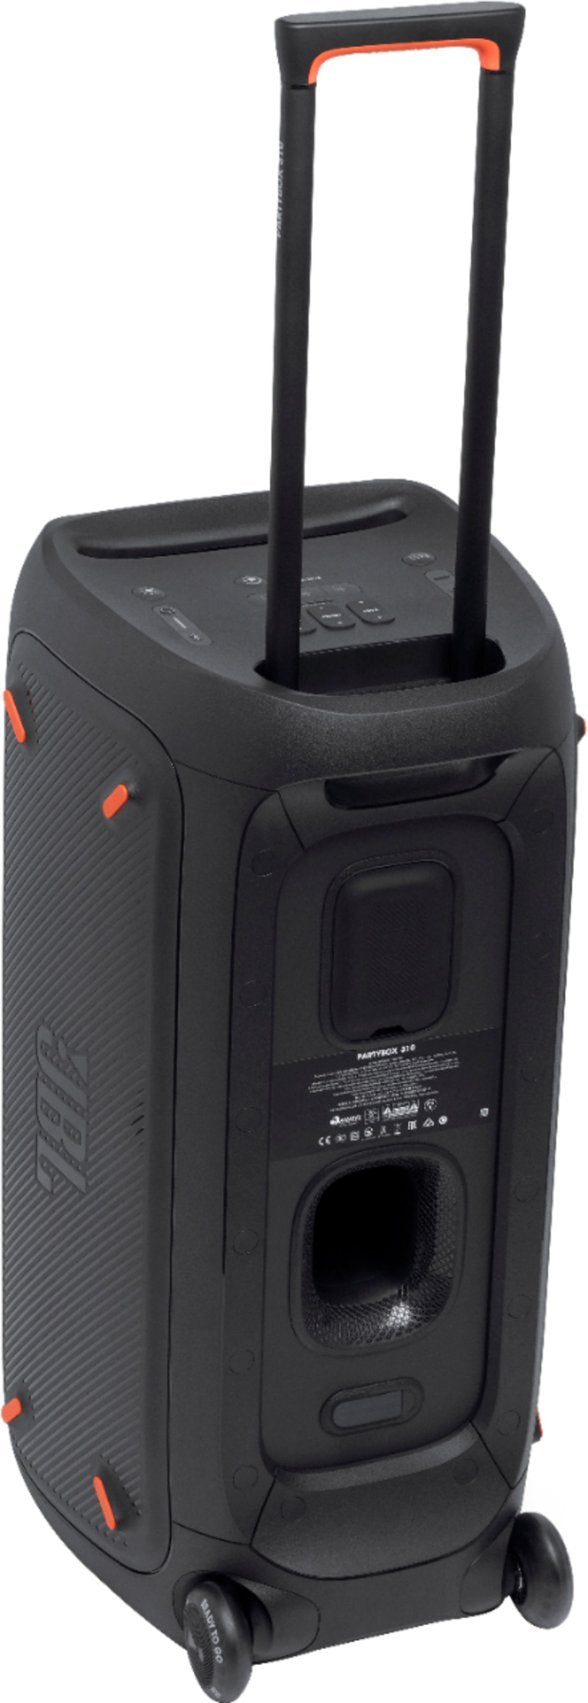 JBL PartyBox 310 - Portable Party Speaker